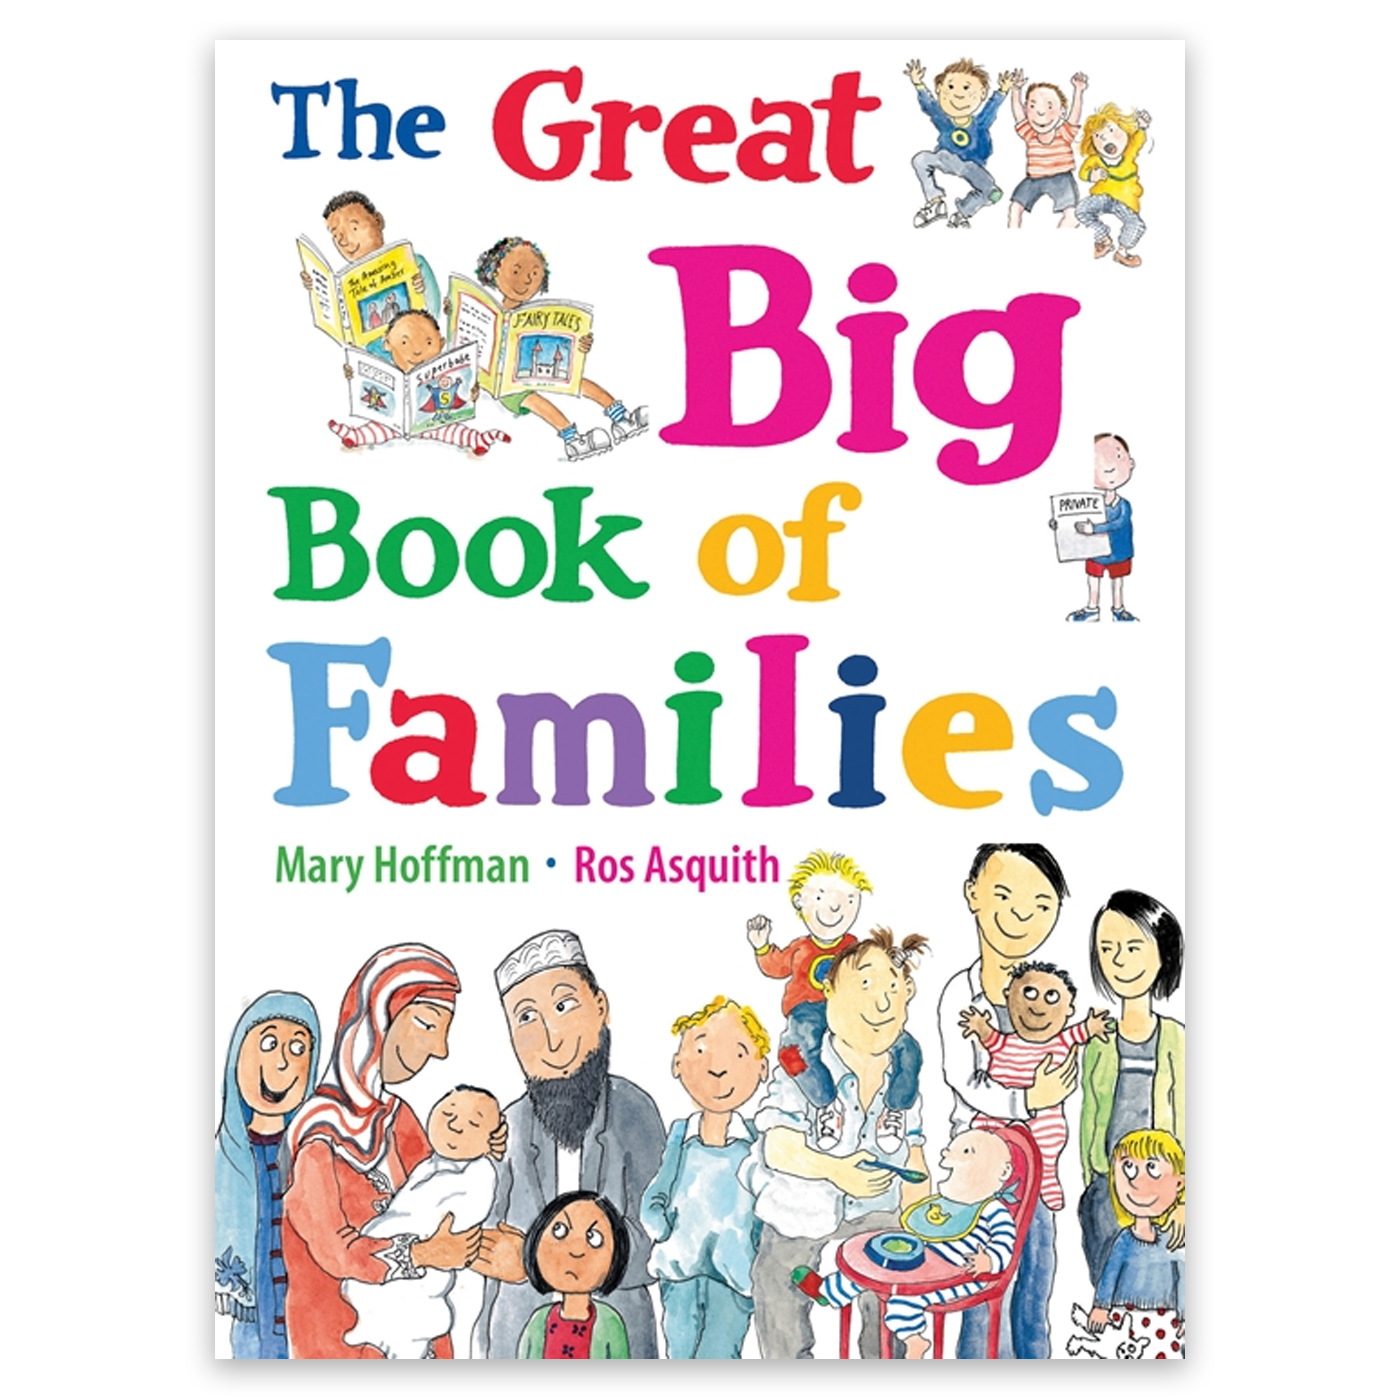  The Great Big Book of Families